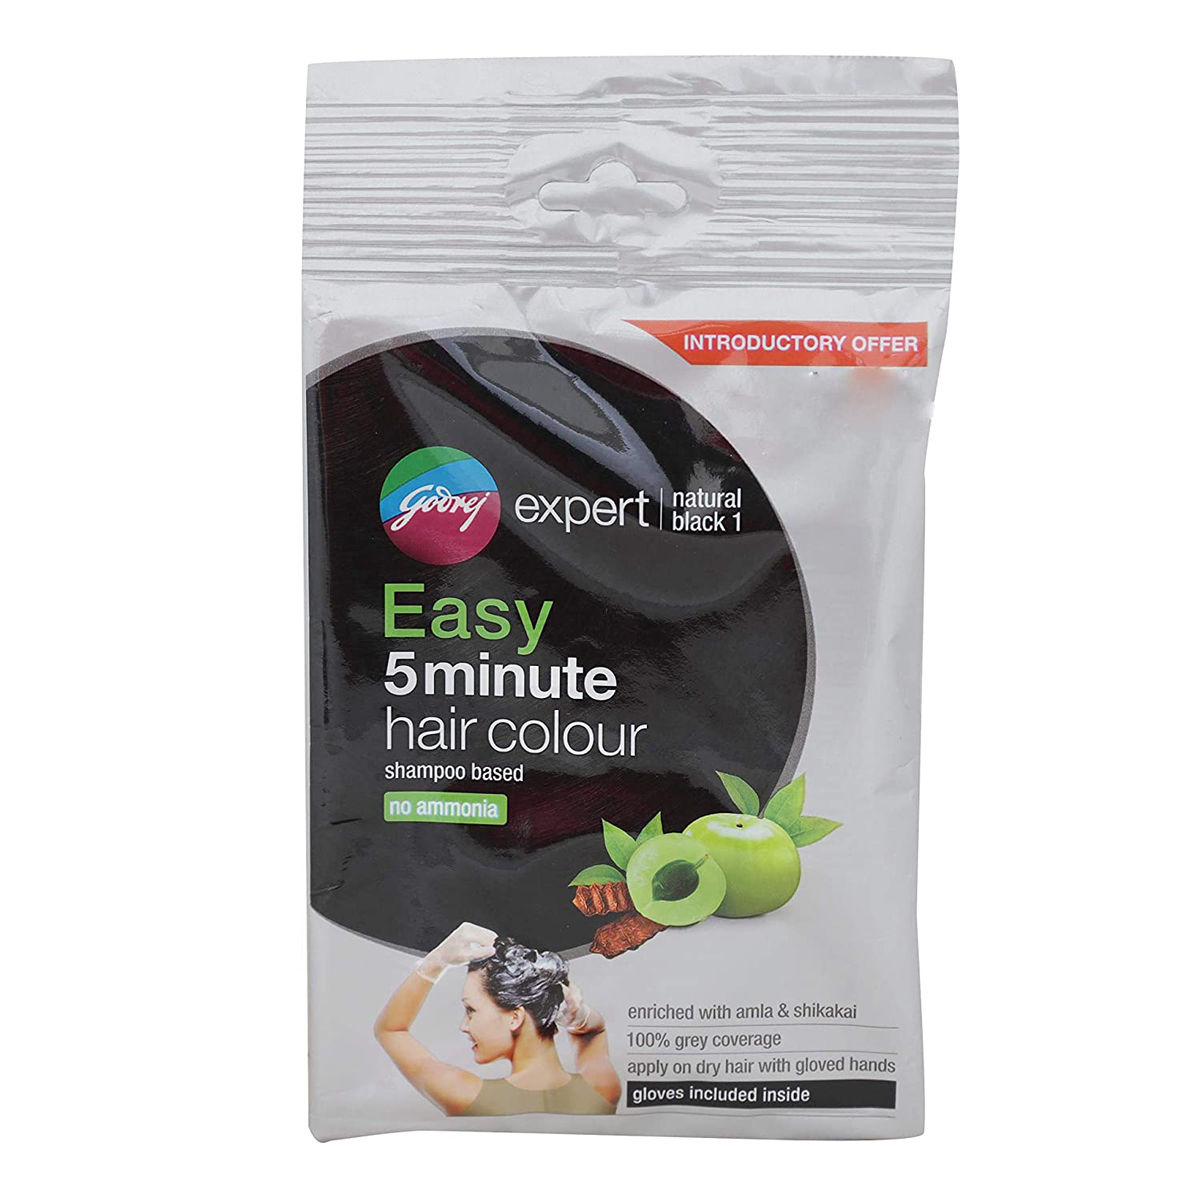 Godrej Expert Shampoo Based Hair Colour Natural Black 1, 20 gm Price, Uses,  Side Effects, Composition - Apollo Pharmacy